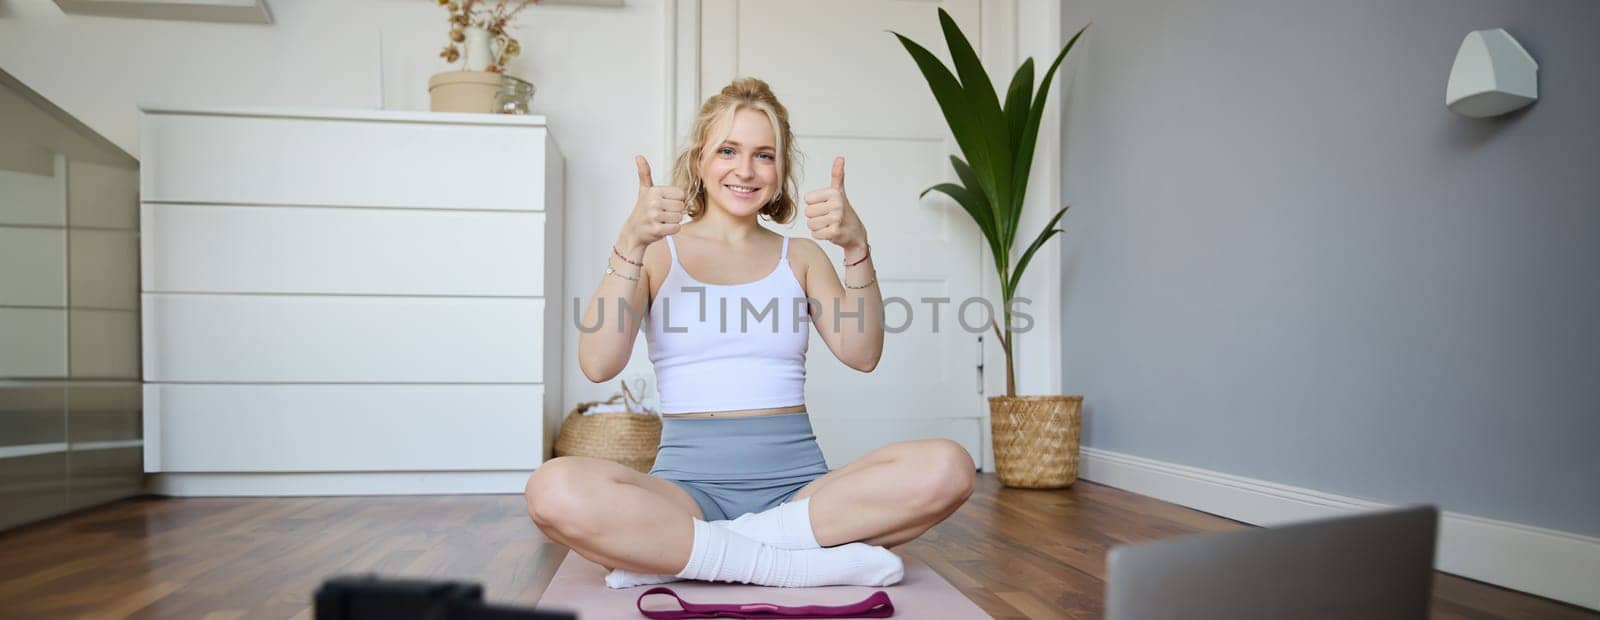 Healthy and fit fitness blogger, recording vlog for wellbeing social media account, sitting on yoga mat and showing thumbs up, using digital camera to create content, following script of laptop.